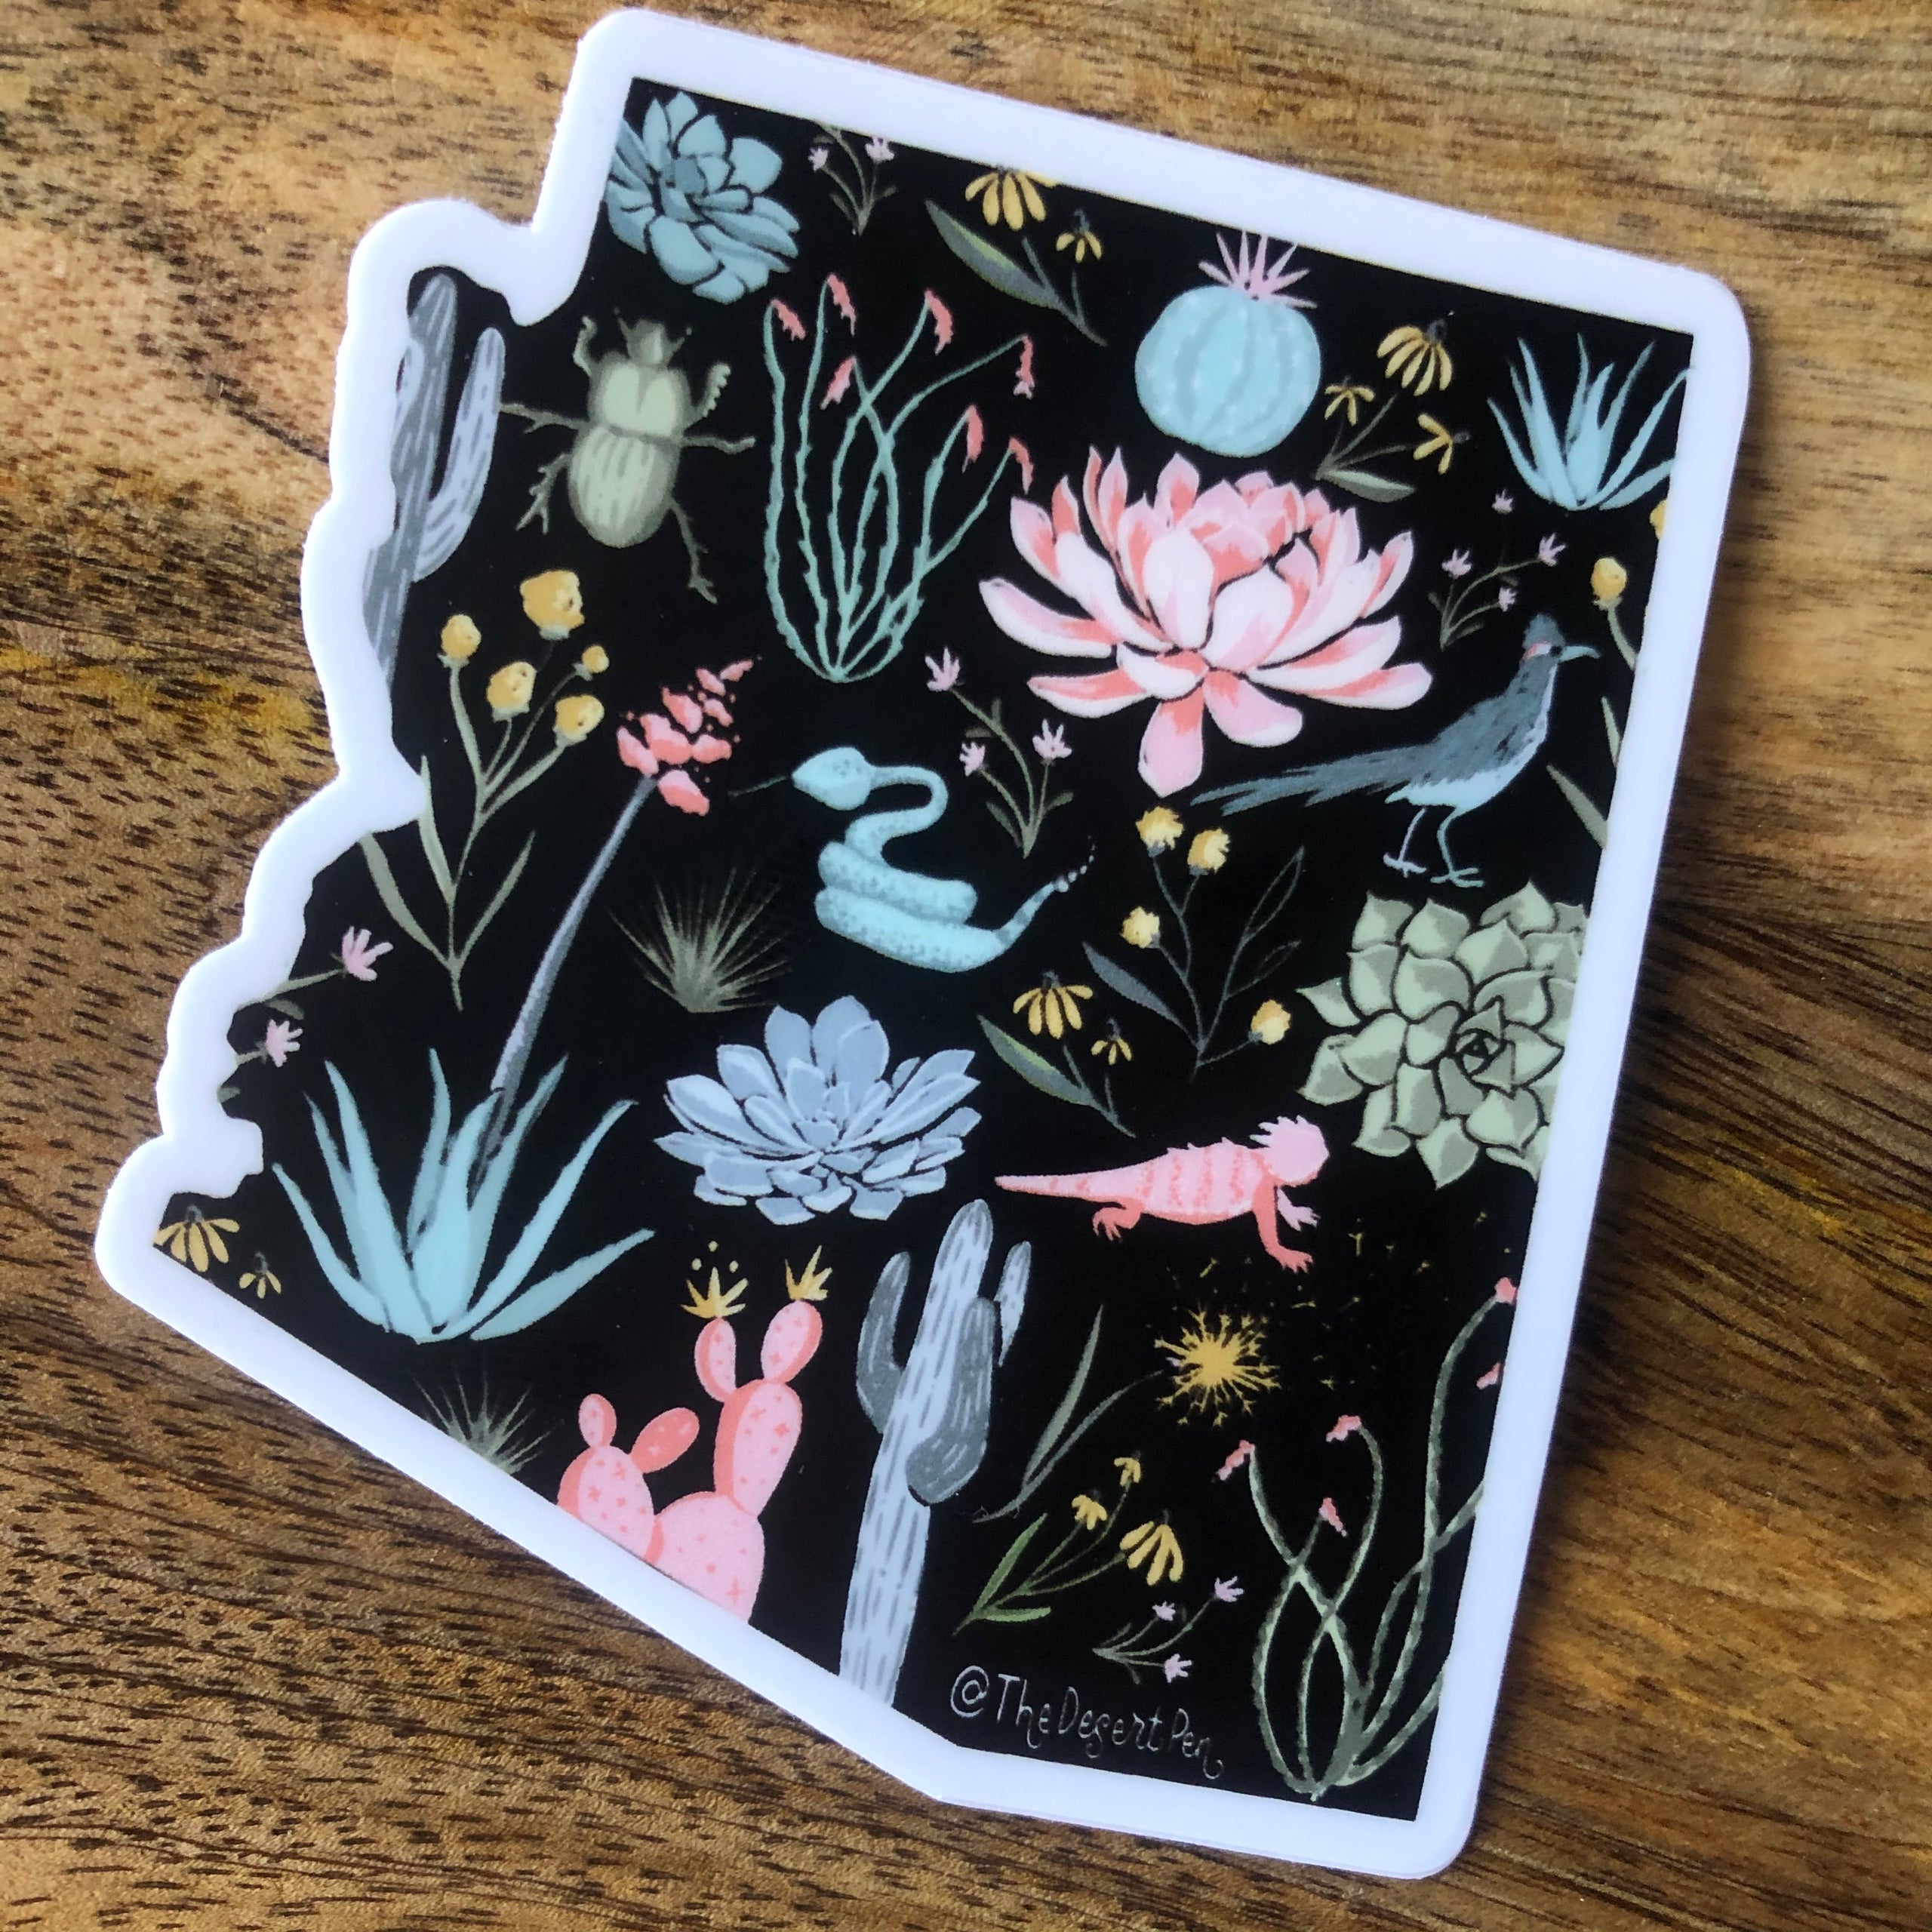 Black sticker shaped like arizona with illustrated plants and animals in pinks, greens, and grays with a wood background behind the sticker